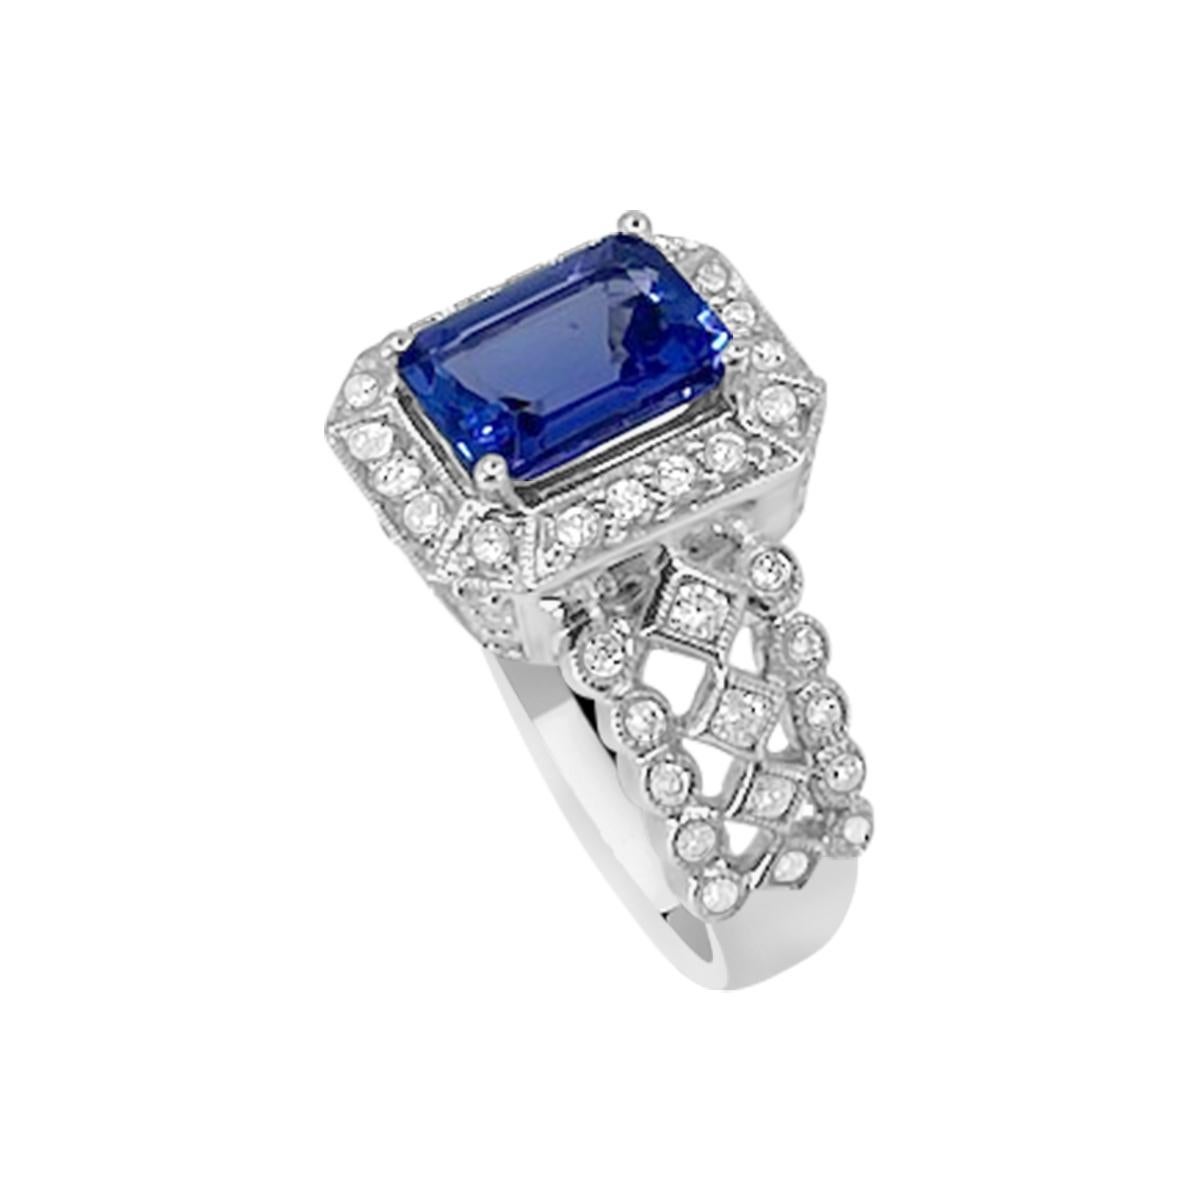 Elegant 9x7mm octagon tanzanite ring. Surrounded with white round diamonds will make any finger look stunning.


Style# REN72657A
Tanzanite: 9x7mm Octagon 2.46cts
Diamond: 62pcs 0.67cts